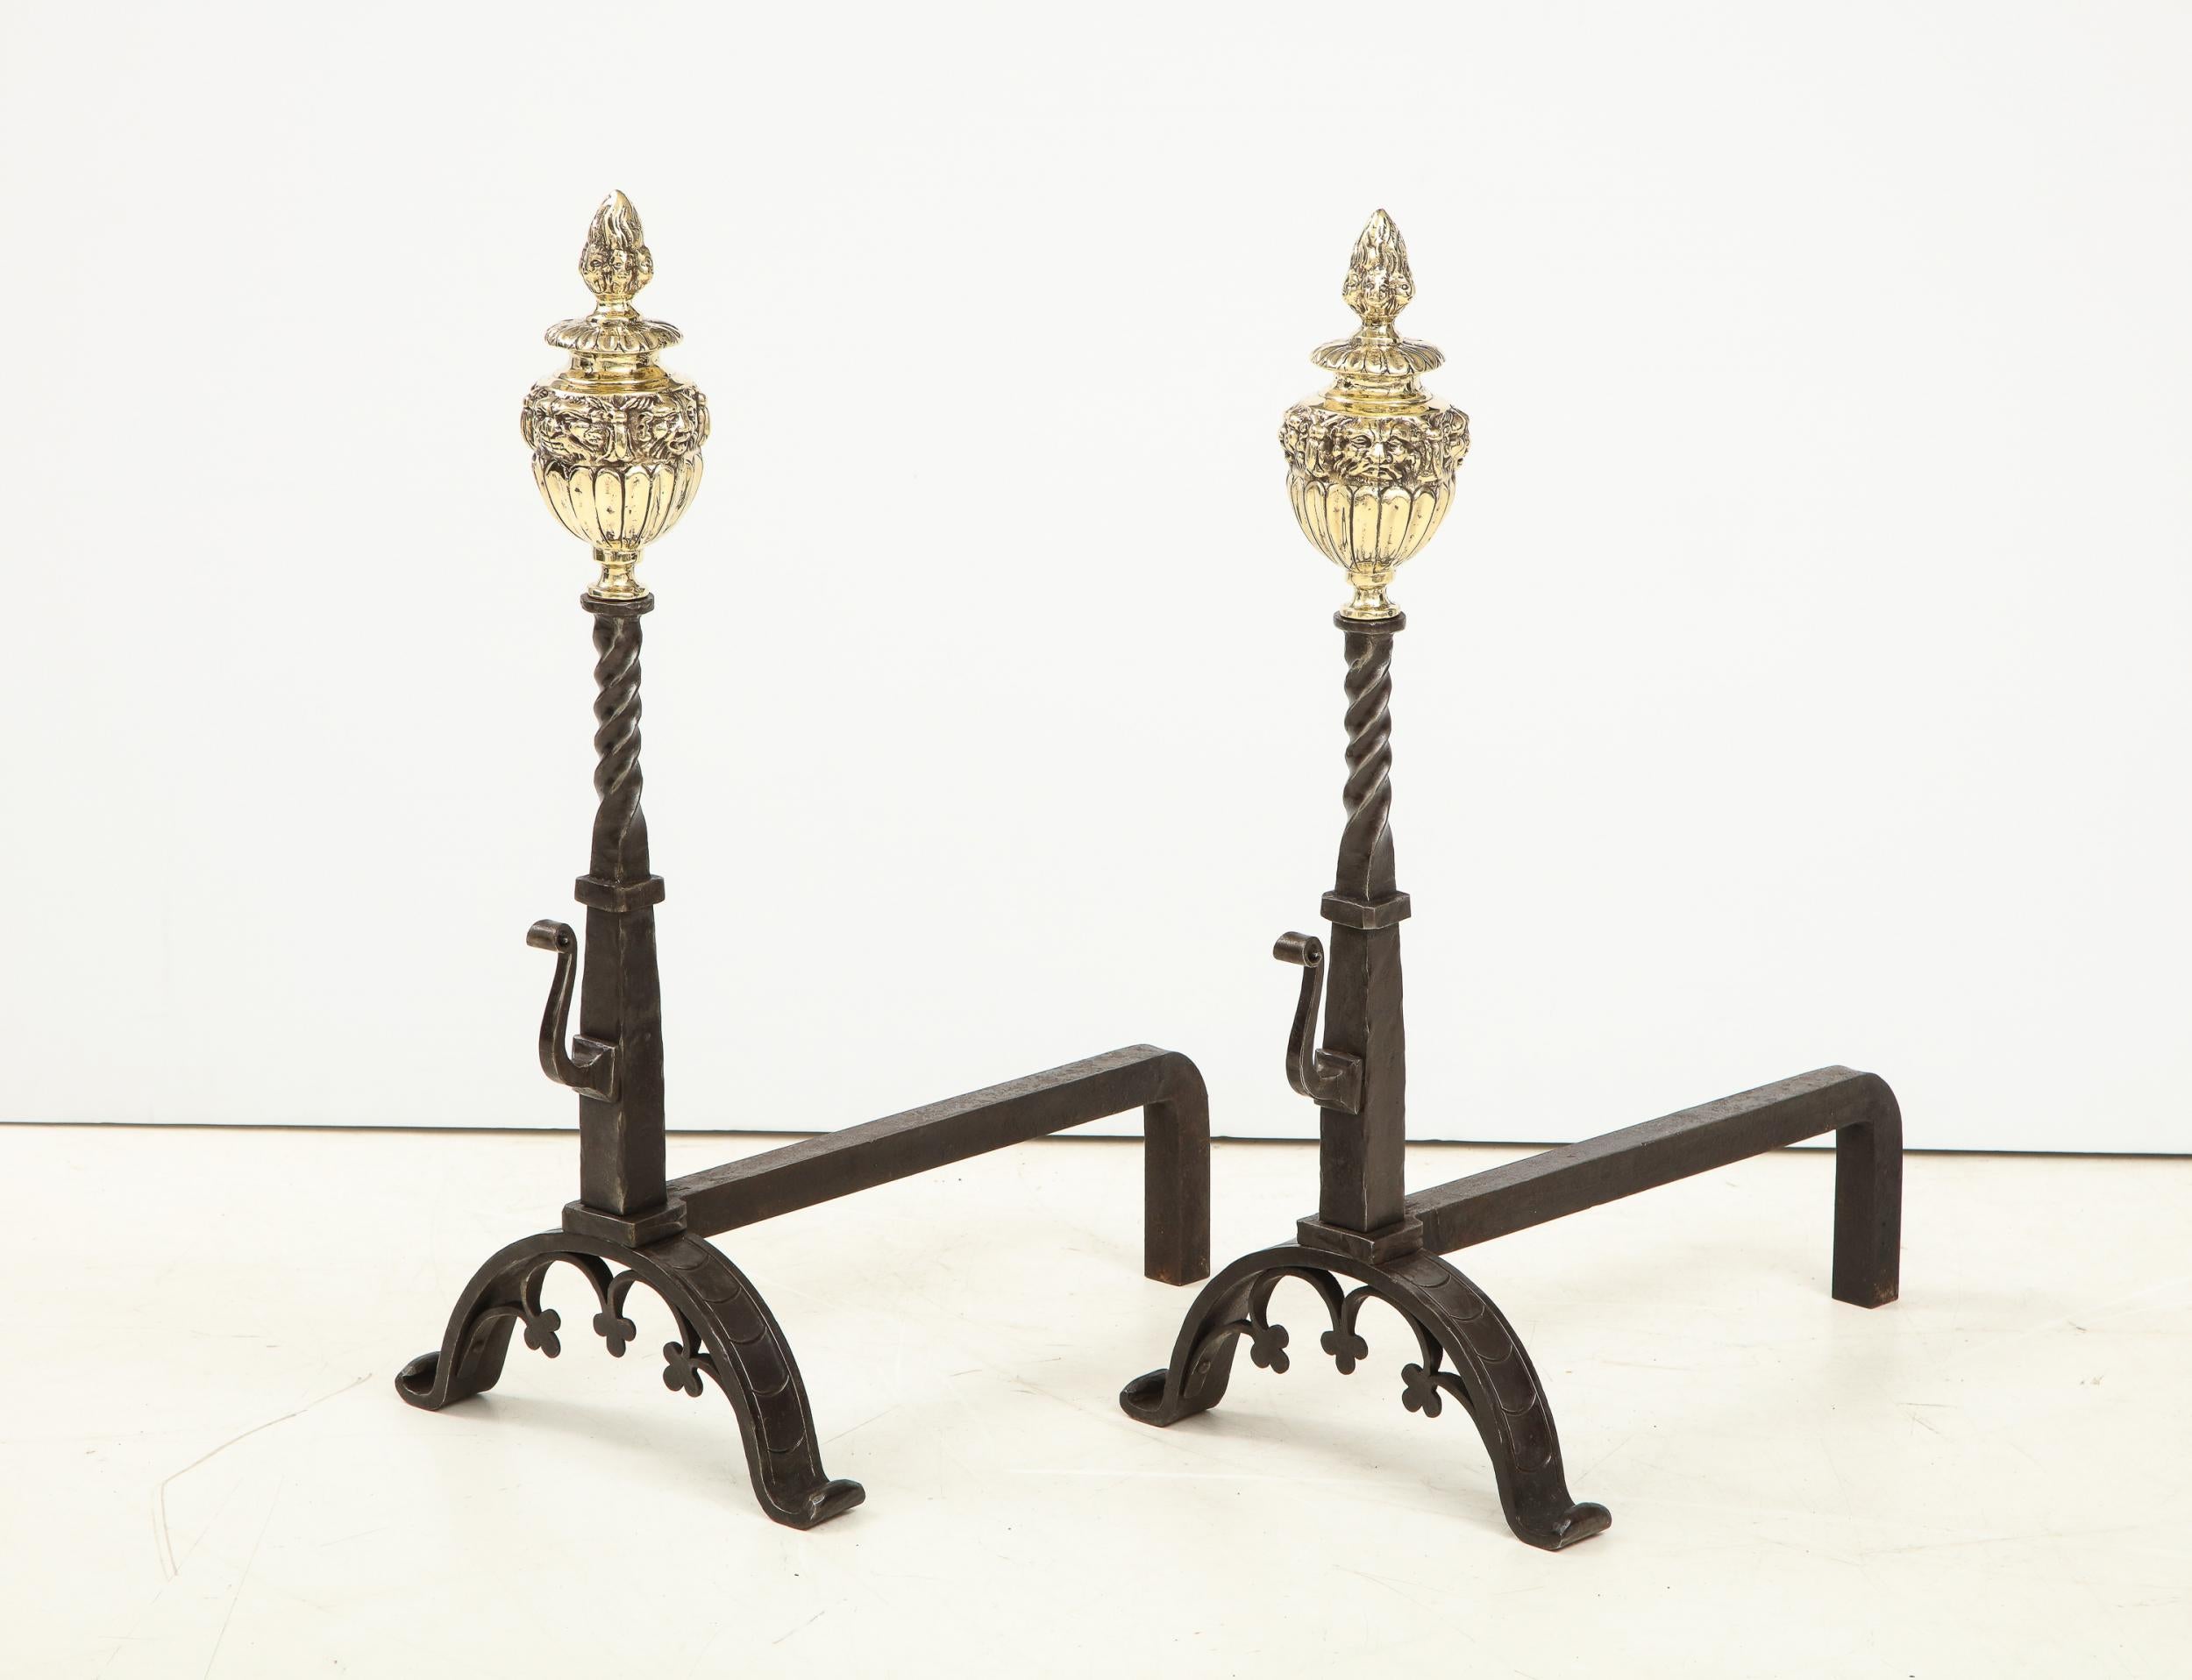 Baroque Pair of Bold Flame Finial Andirons